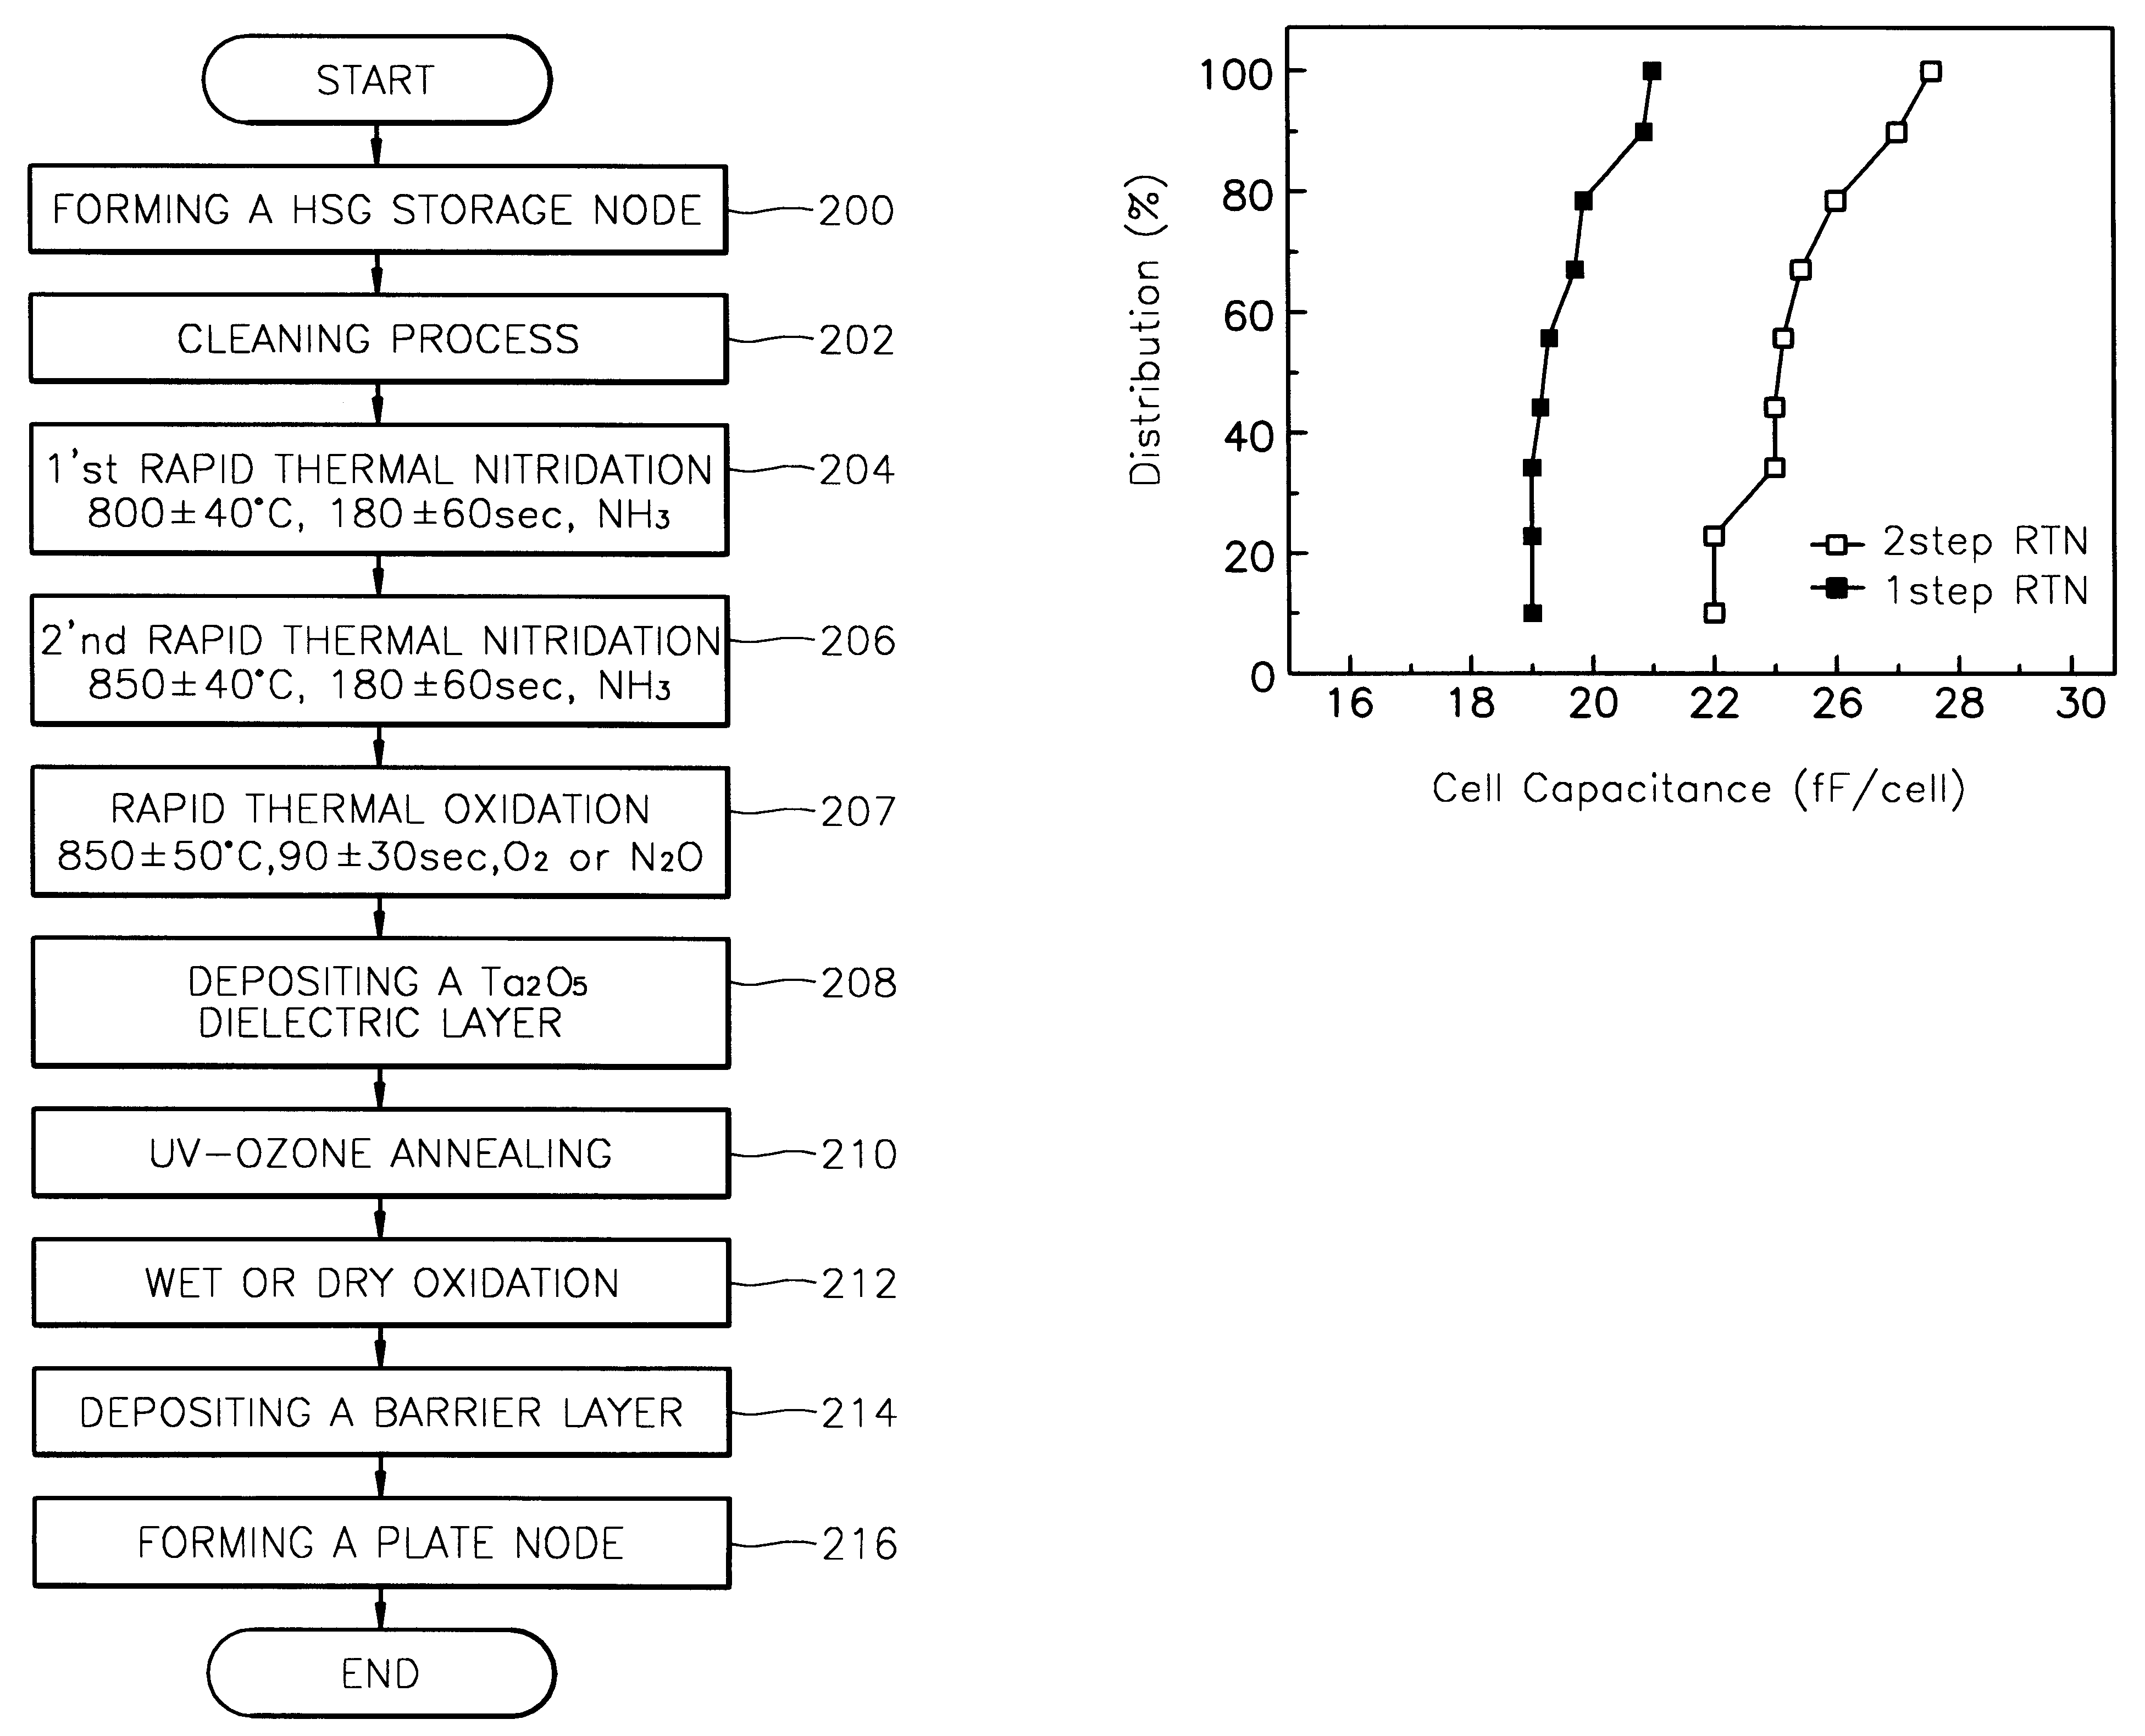 Method for forming a tantalum oxide capacitor using two-step rapid thermal nitridation